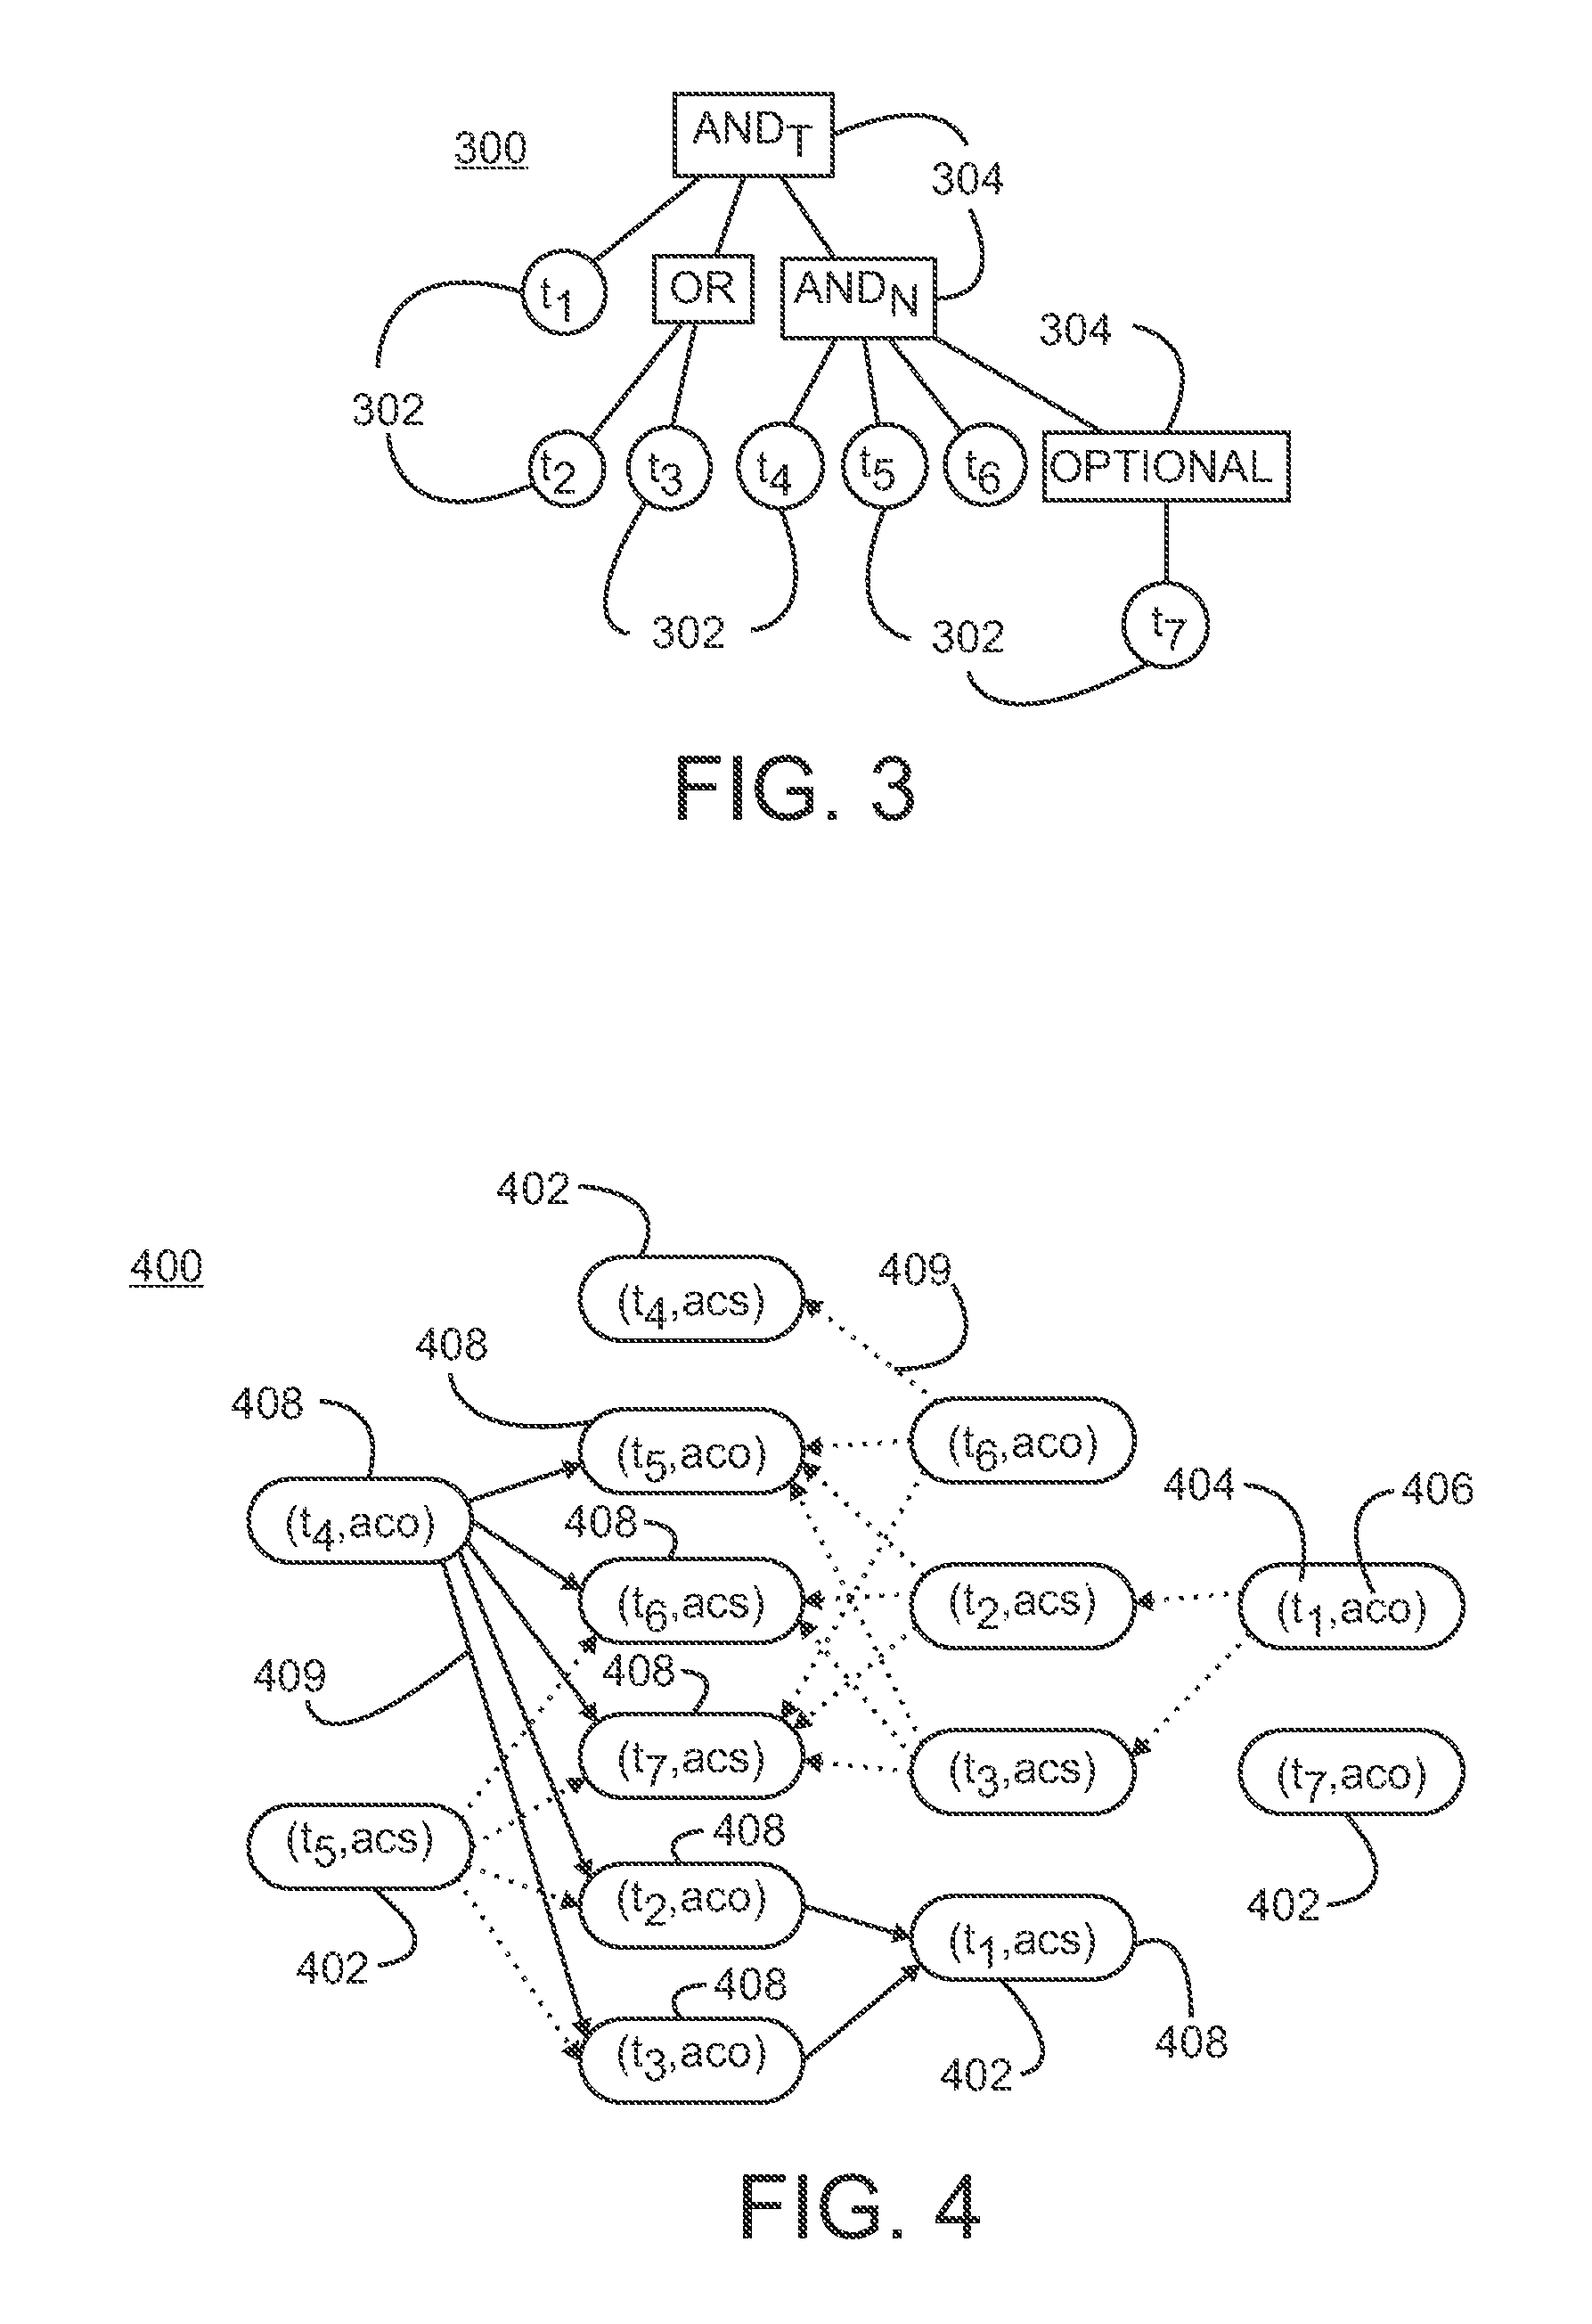 Method and apparatus for optimizing the evaluation of semantic web queries